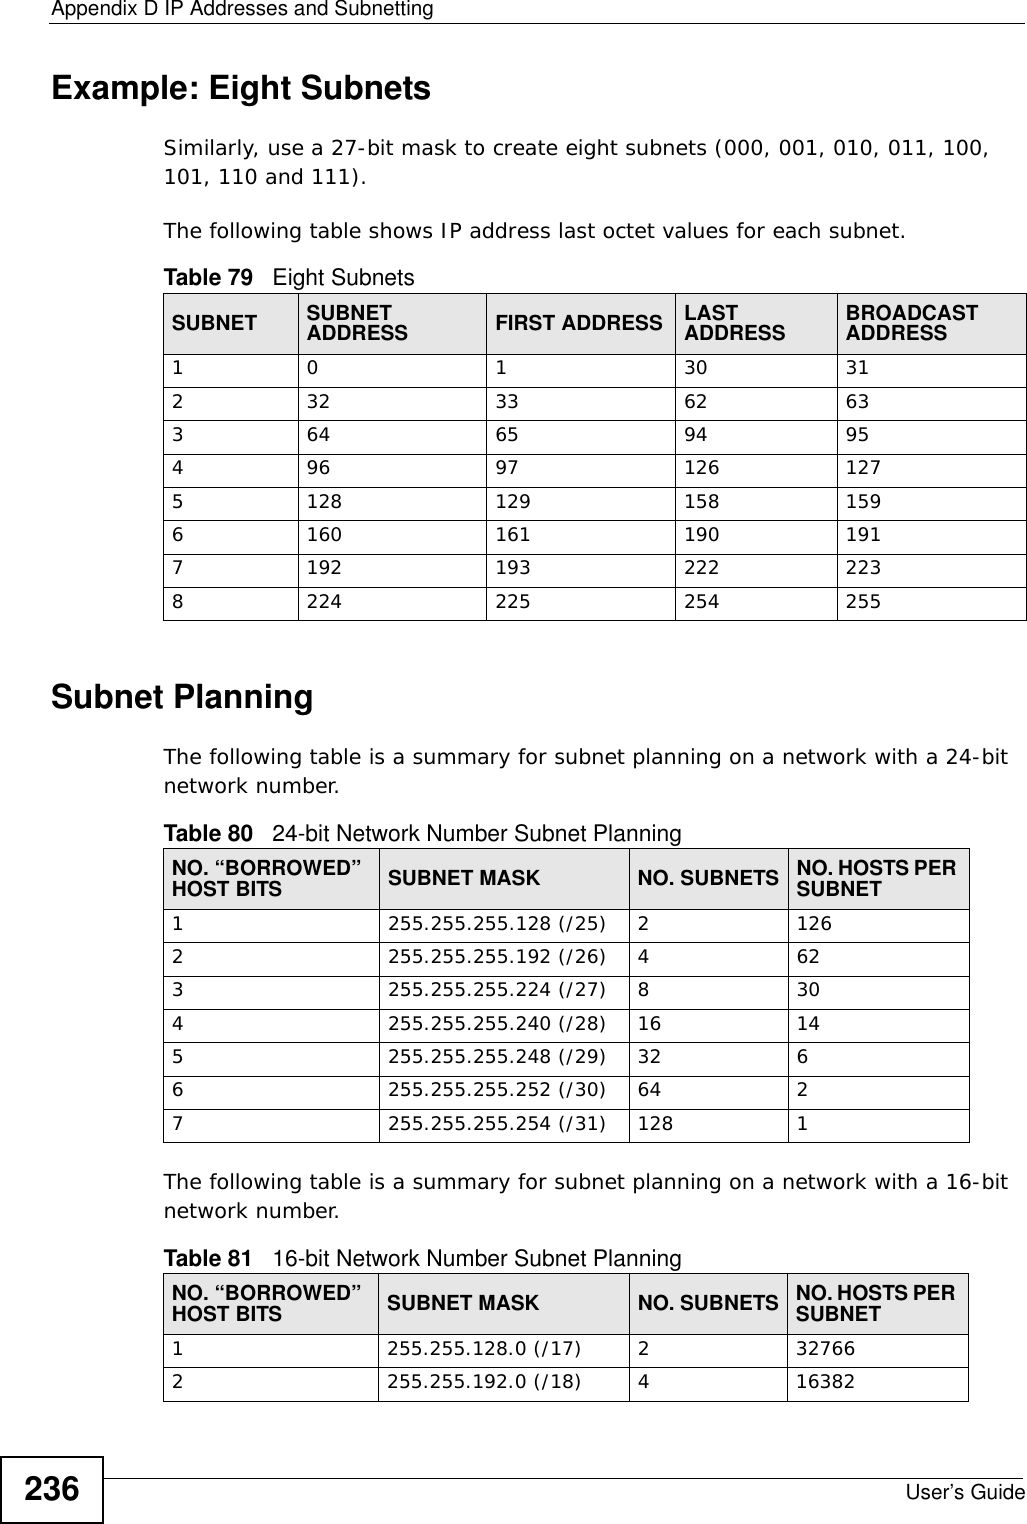 Appendix D IP Addresses and SubnettingUser’s Guide236Example: Eight SubnetsSimilarly, use a 27-bit mask to create eight subnets (000, 001, 010, 011, 100, 101, 110 and 111). The following table shows IP address last octet values for each subnet.Subnet PlanningThe following table is a summary for subnet planning on a network with a 24-bit network number.The following table is a summary for subnet planning on a network with a 16-bit network number. Table 79   Eight SubnetsSUBNET SUBNET ADDRESS FIRST ADDRESS LAST ADDRESS BROADCAST ADDRESS1 0 1 30 31232 33 62 63364 65 94 95496 97 126 1275128 129 158 1596160 161 190 1917192 193 222 2238224 225 254 255Table 80   24-bit Network Number Subnet PlanningNO. “BORROWED” HOST BITS SUBNET MASK NO. SUBNETS NO. HOSTS PER SUBNET1255.255.255.128 (/25) 21262255.255.255.192 (/26) 4623255.255.255.224 (/27) 8304255.255.255.240 (/28) 16 145255.255.255.248 (/29) 32 66255.255.255.252 (/30) 64 27255.255.255.254 (/31) 128 1Table 81   16-bit Network Number Subnet PlanningNO. “BORROWED” HOST BITS SUBNET MASK NO. SUBNETS NO. HOSTS PER SUBNET1255.255.128.0 (/17) 2327662255.255.192.0 (/18) 416382